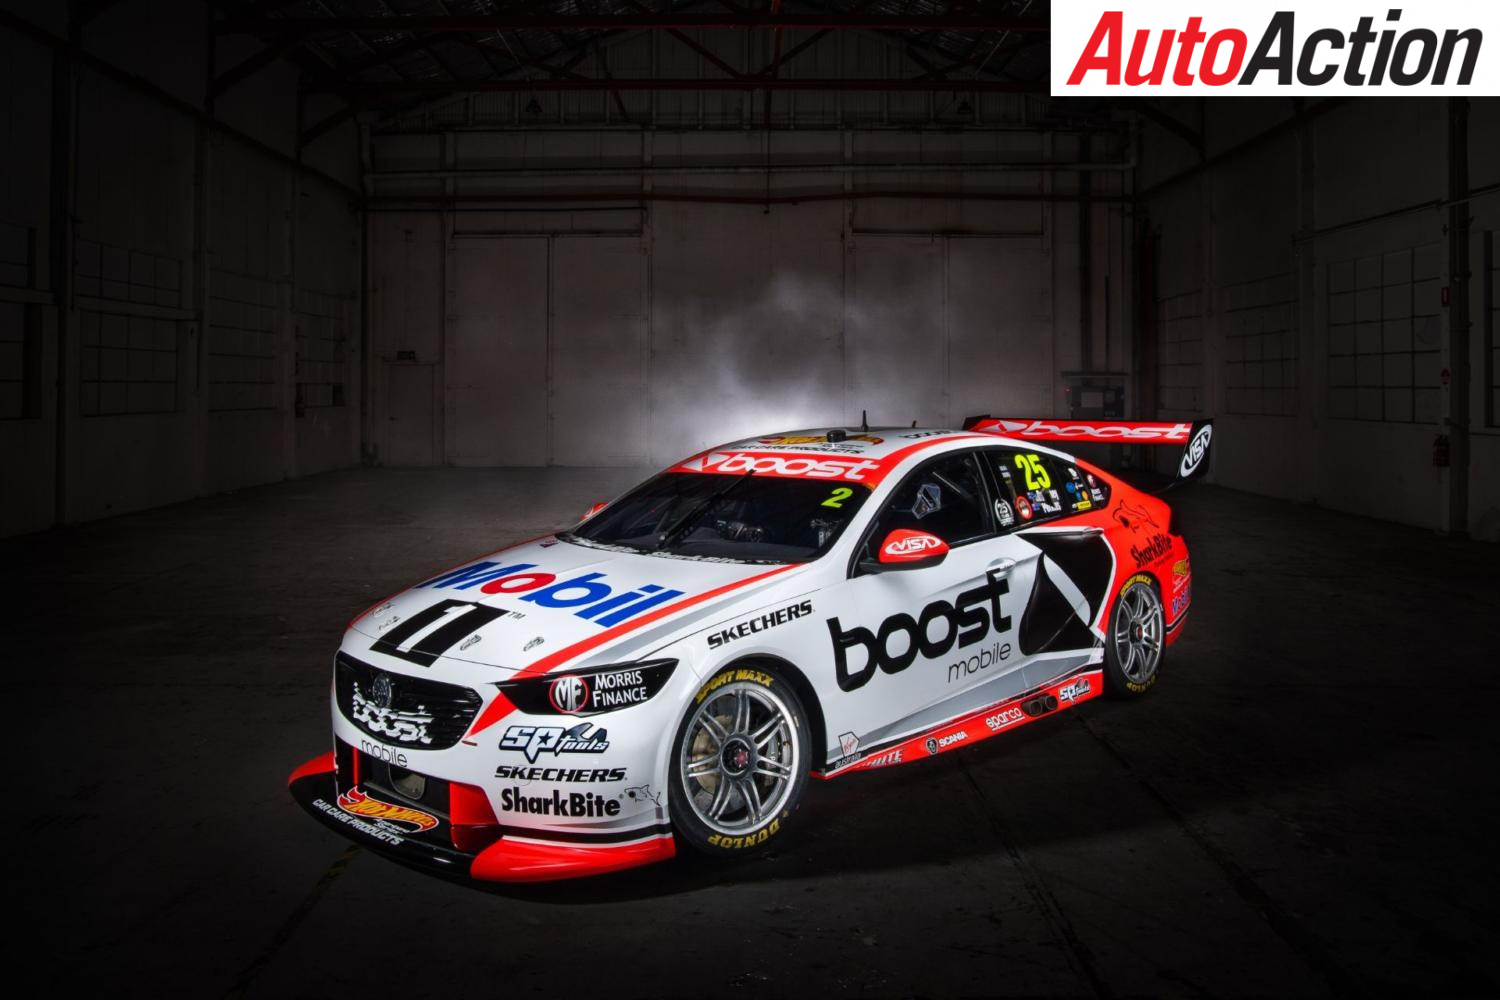 Mobil 1 Boost Mobile Racing throw back to 2008 HRT livery - Photo: Supplied